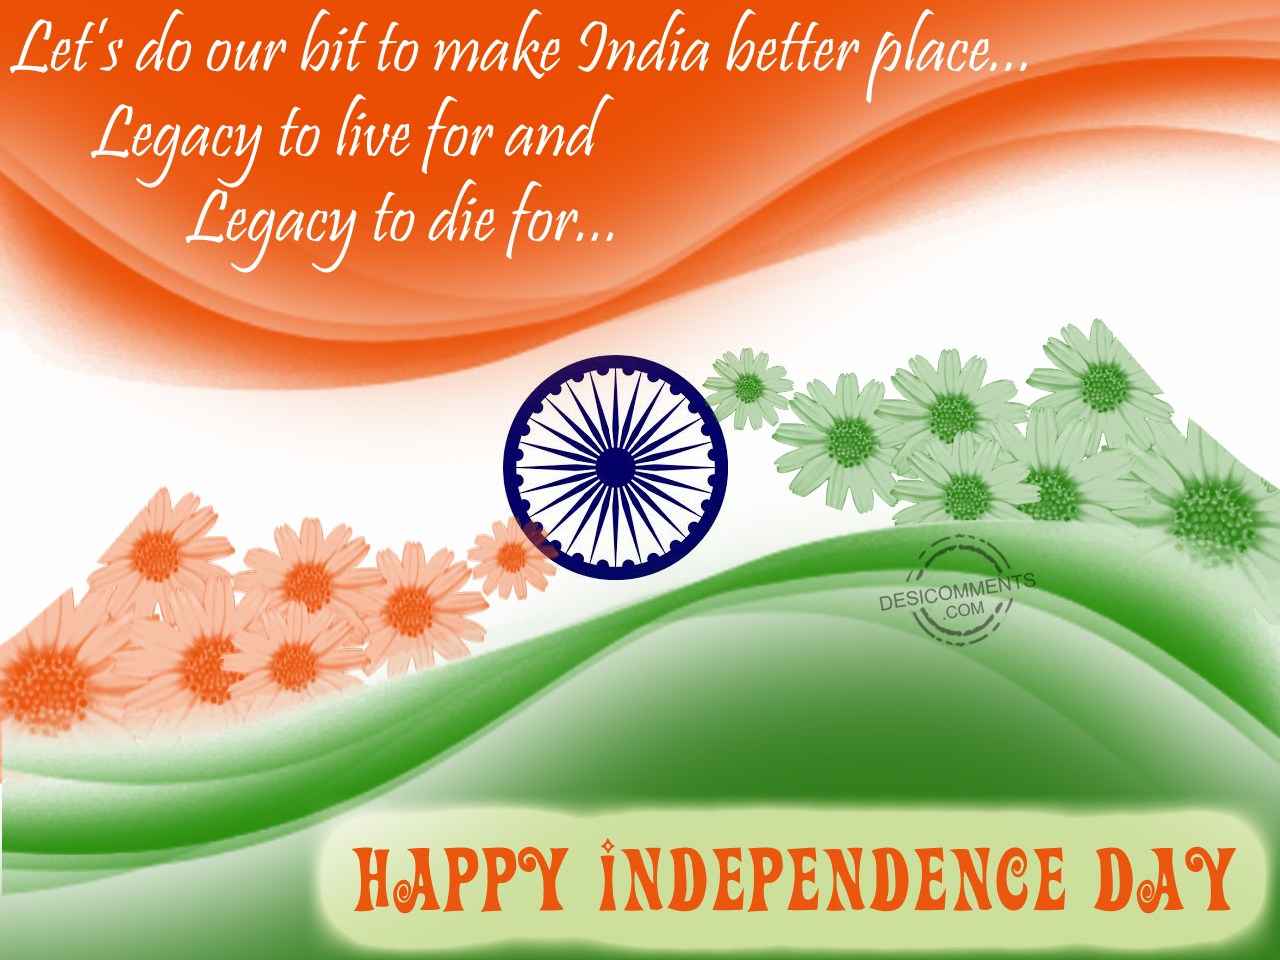 Happy Independence Day Images Photos 2021